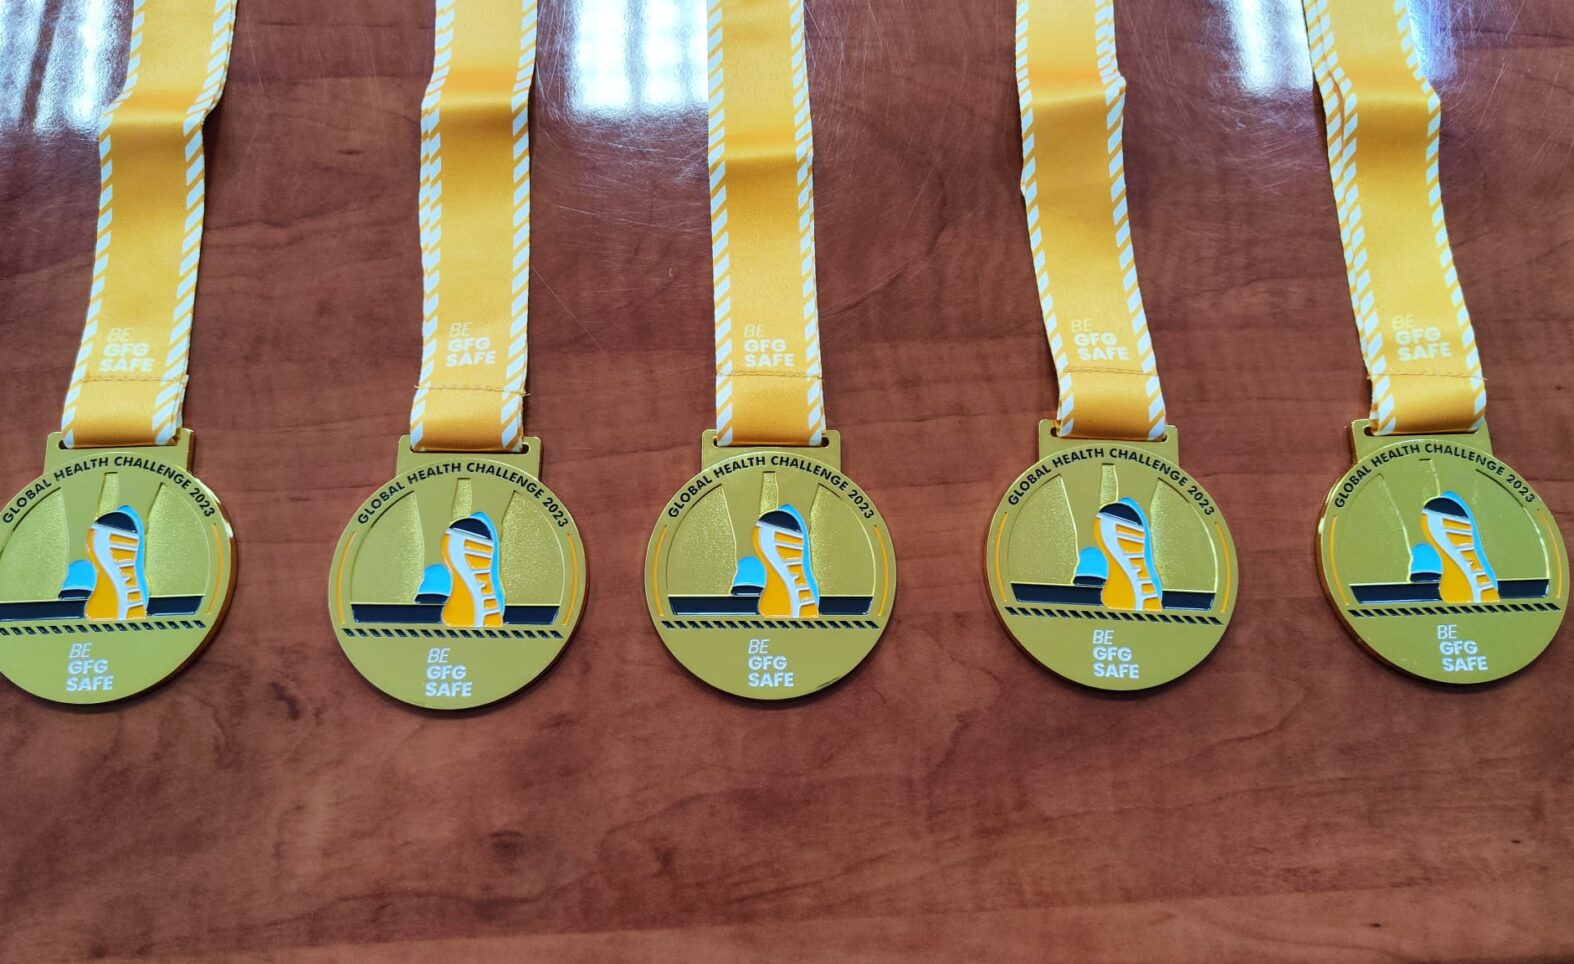 Teams Shine Bright with Health Challenge Medals